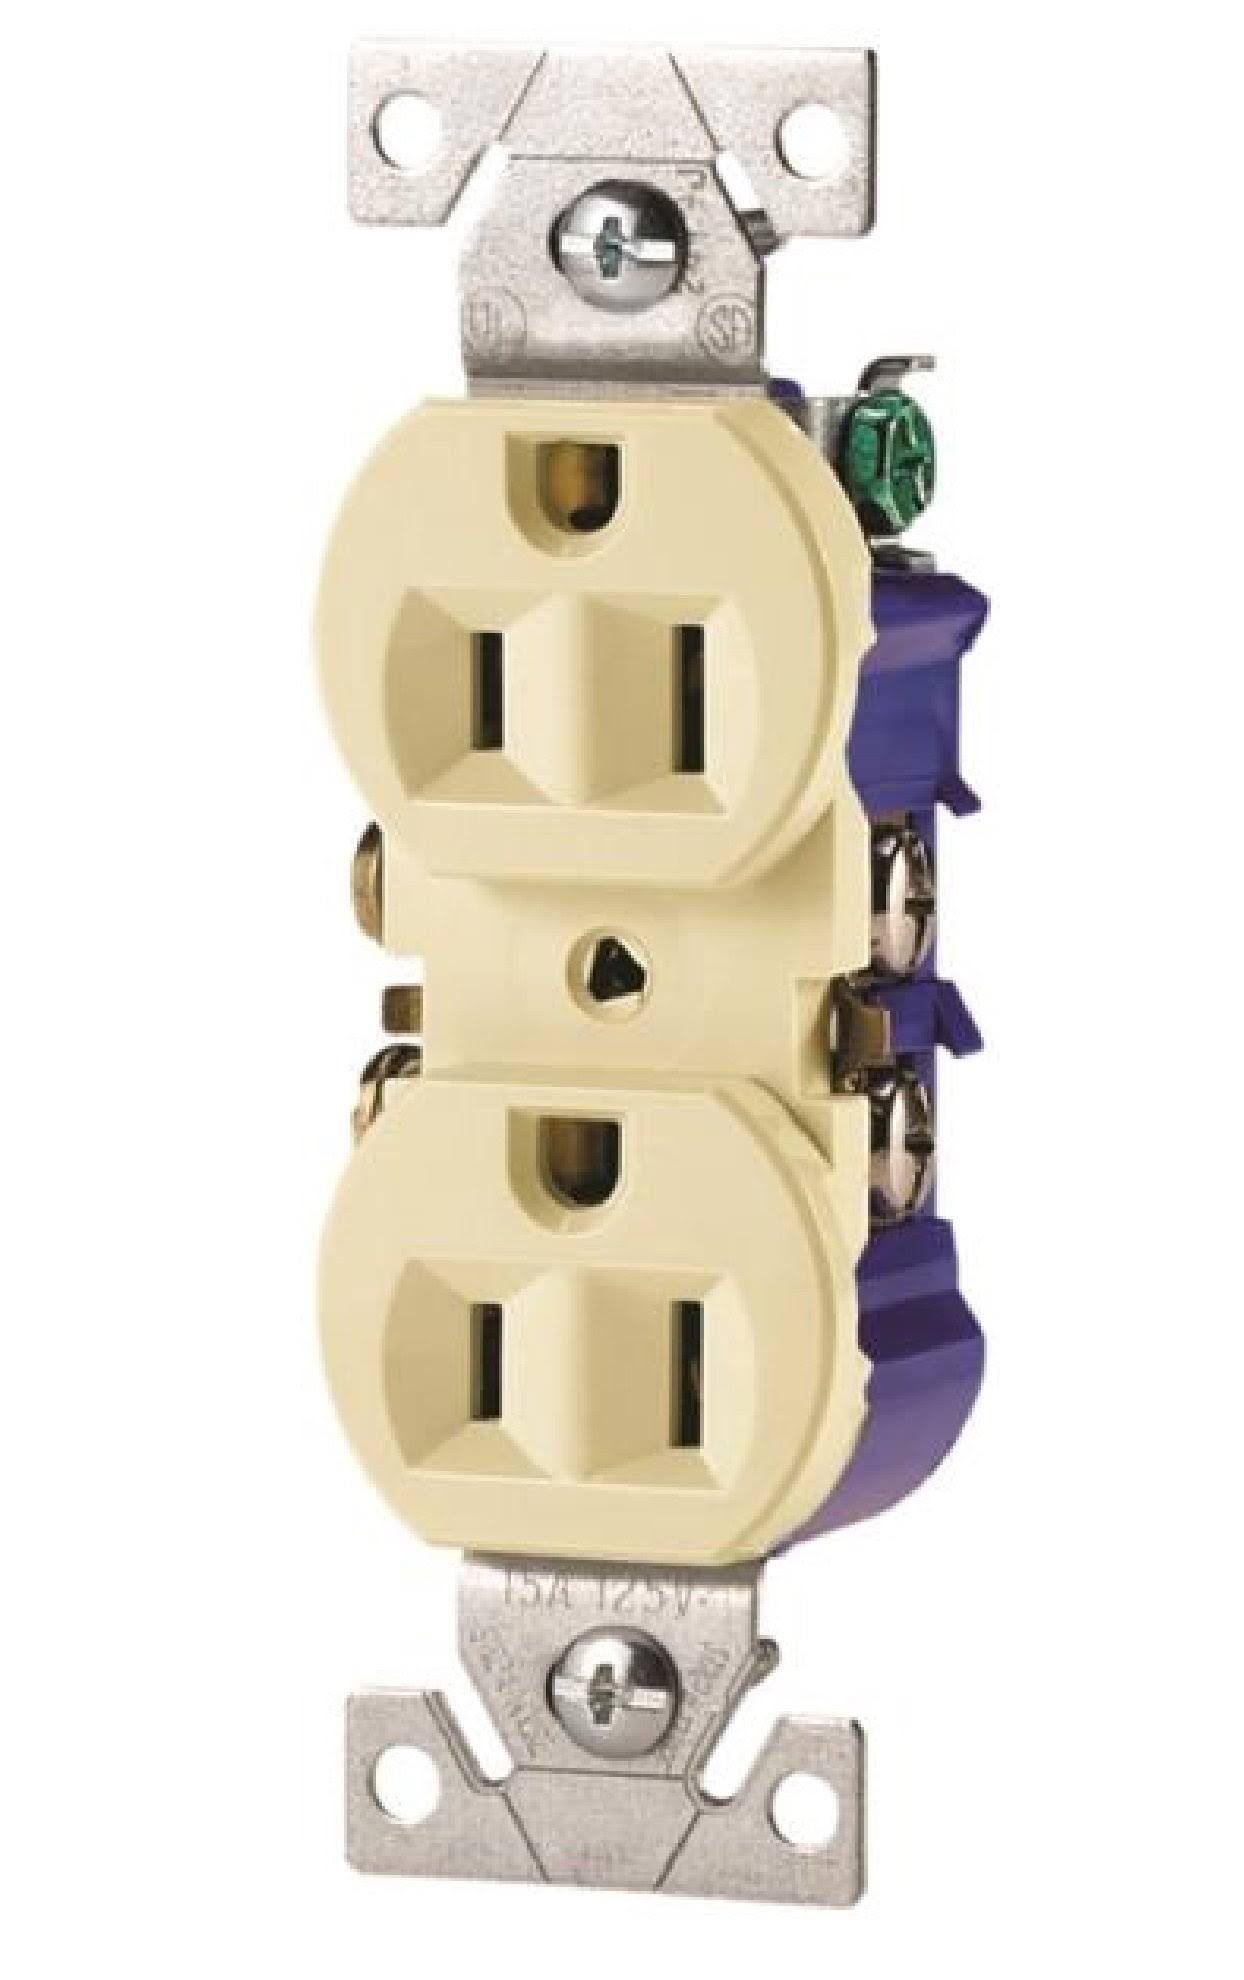 Cooper Wiring Devices 270A-SP-L Standard Grade Straight Blade Duplex Receptacle - Almond, 15A, 125V